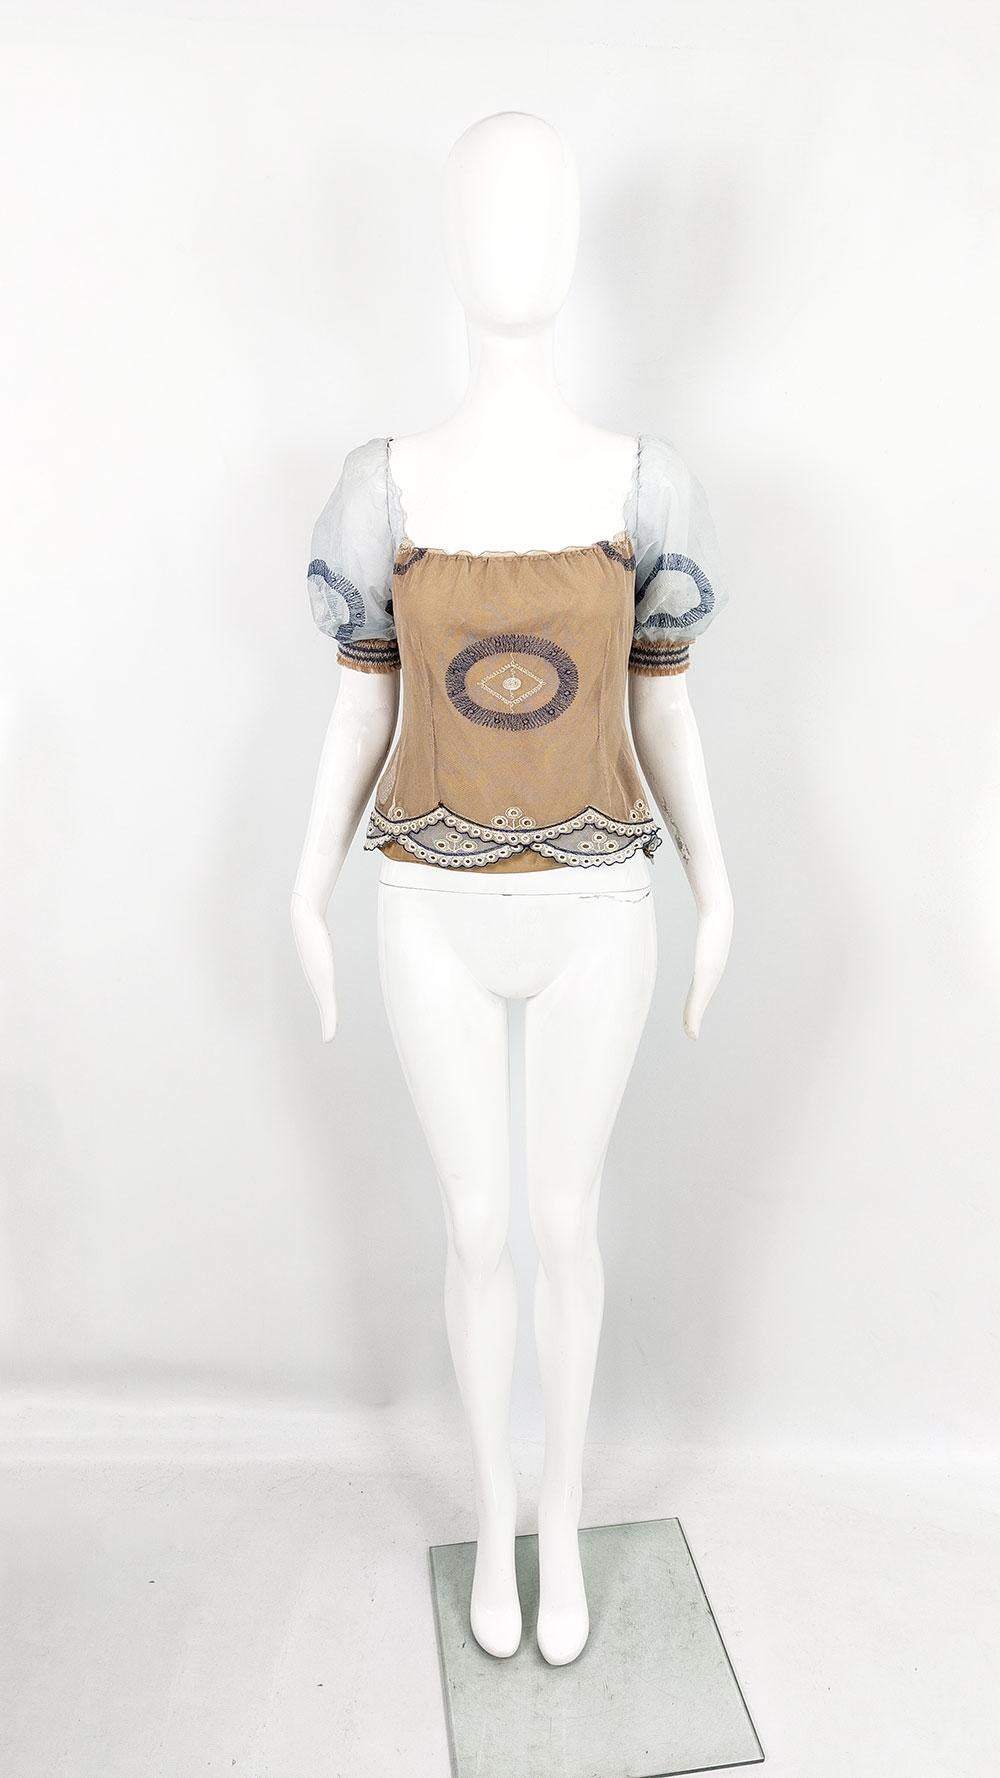 A super cute vintage womens top from the early 2000s by luxury British fashion designer, Ronit Zilkha. In a nude coloured fabric with a sheer mesh overlay and pastel blue mesh sleeves. The intricate embroidery adds a luxury ethereal / boho